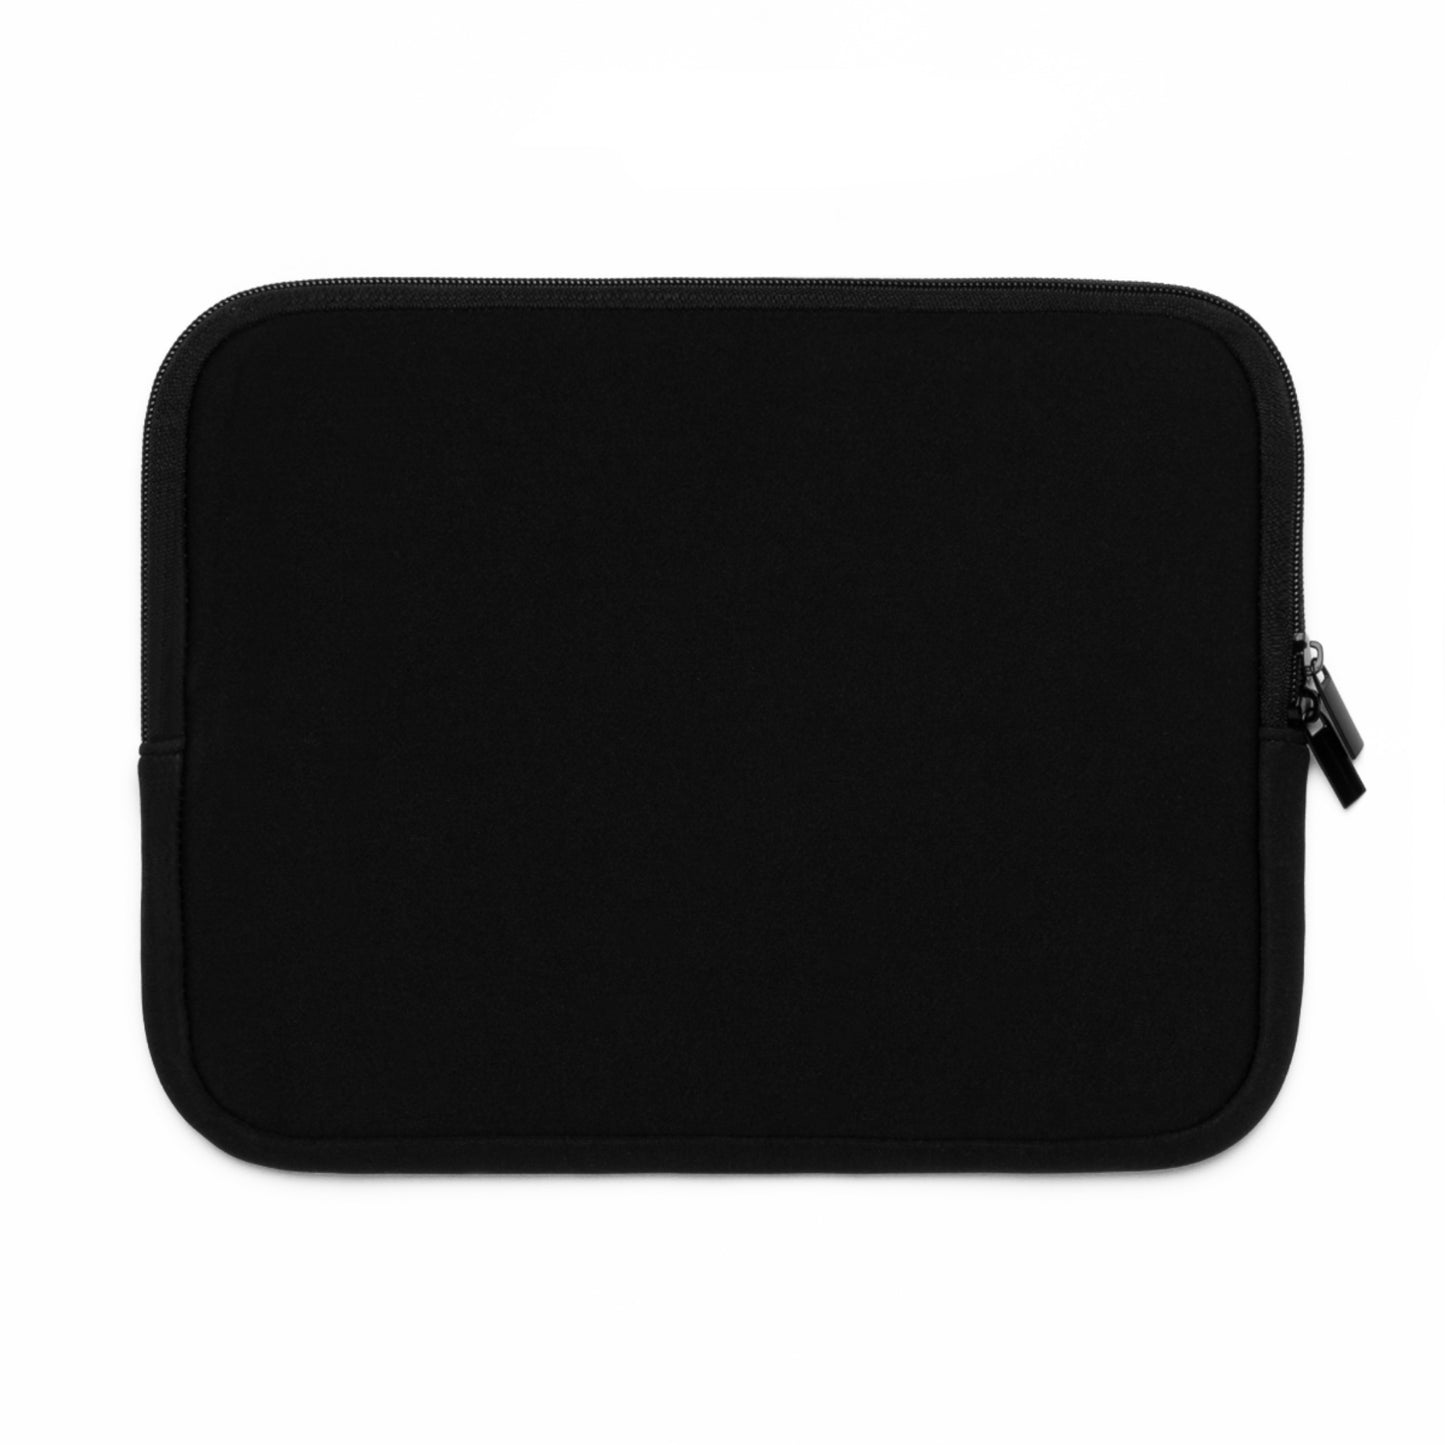 Onyx Prowl Panther's Palette Laptop Sleeve